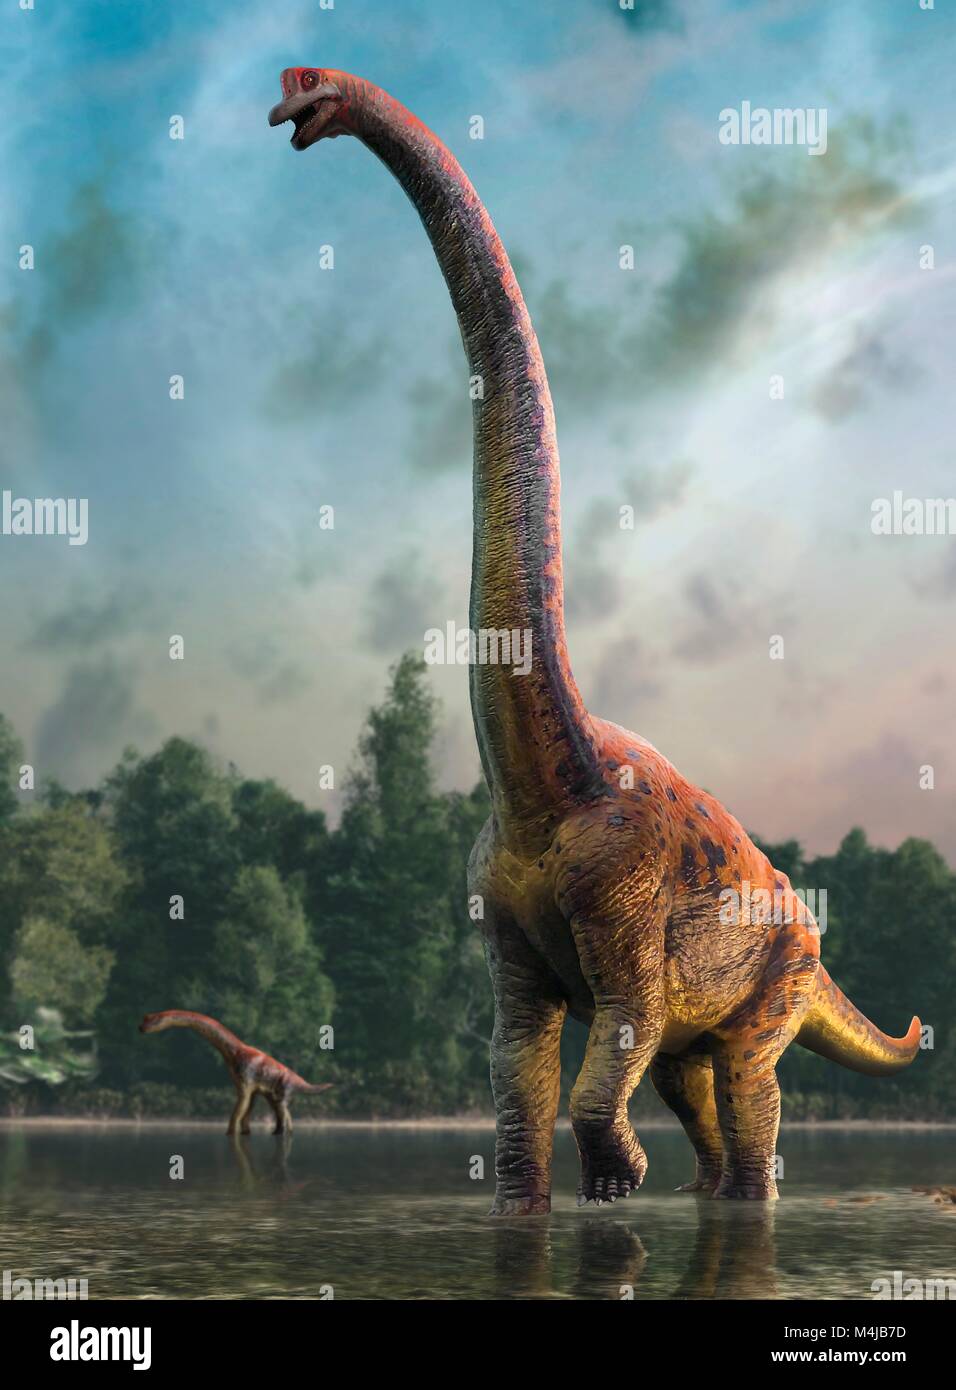 Illustration of a giraffatitan dinosaur mother and infant. Giraffatitan was previously thought to be a species of brachiosaurus (B. brancai) but is now thought to belong to a separate genus. These animals were sauropods, four-legged, plant-eating dinosaurs from the Jurassic period. They reached a maximum length of about 26 metres and weighed up to 40 tonnes. The skeletons of Brachiosaurus and Giraffatitan, although coming from different continents (America and Africa, respectively) look almost identical to the untrained eye, so this picture could represent either animal. Stock Photo